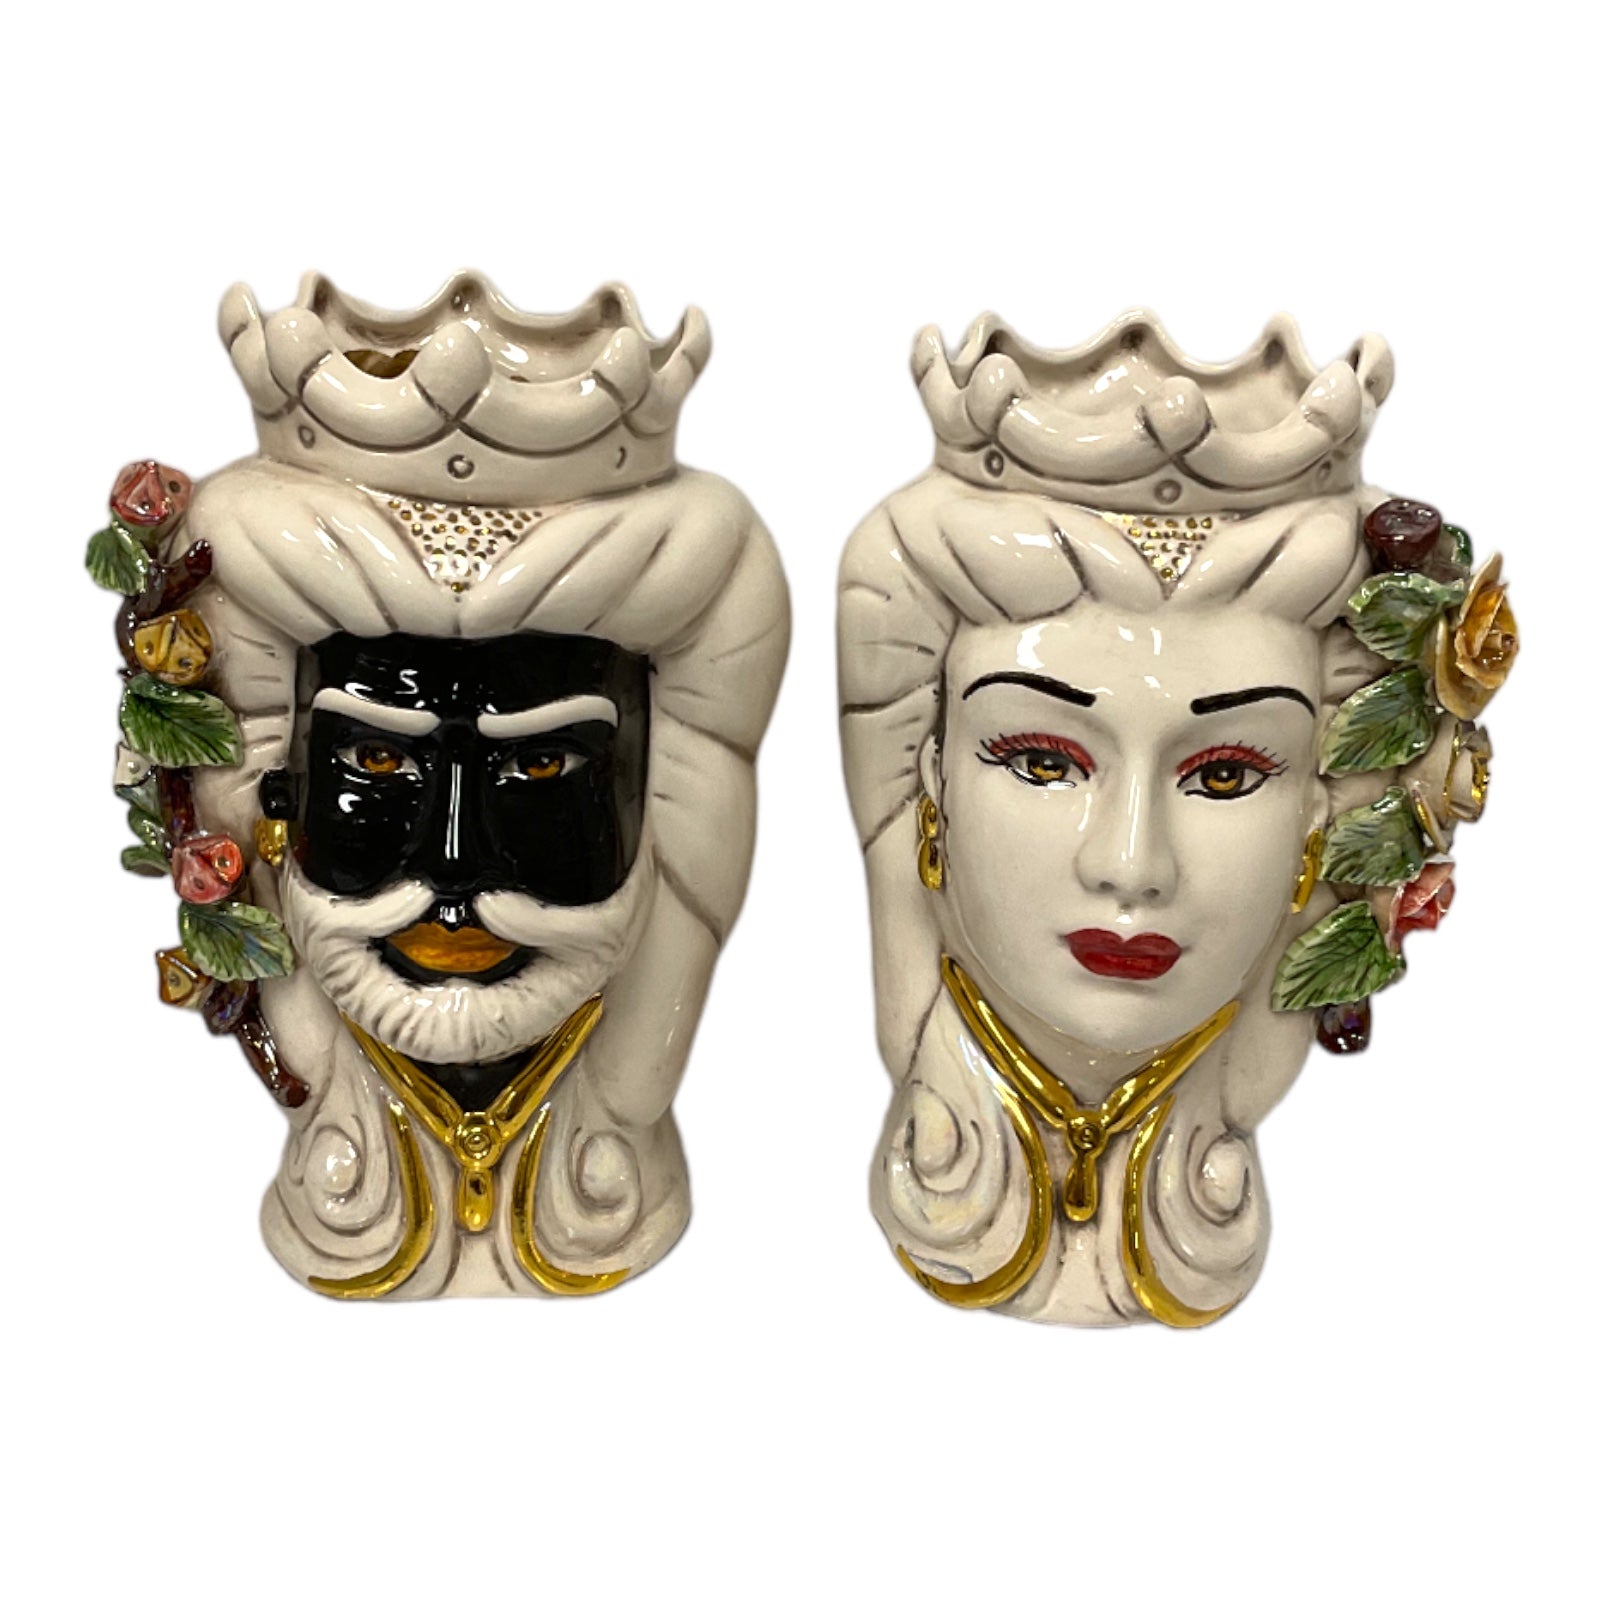 Couple of Caltagirone Moor Heads with Roses - h 25 cm approx. Pure gold and mother-of-pearl enamel